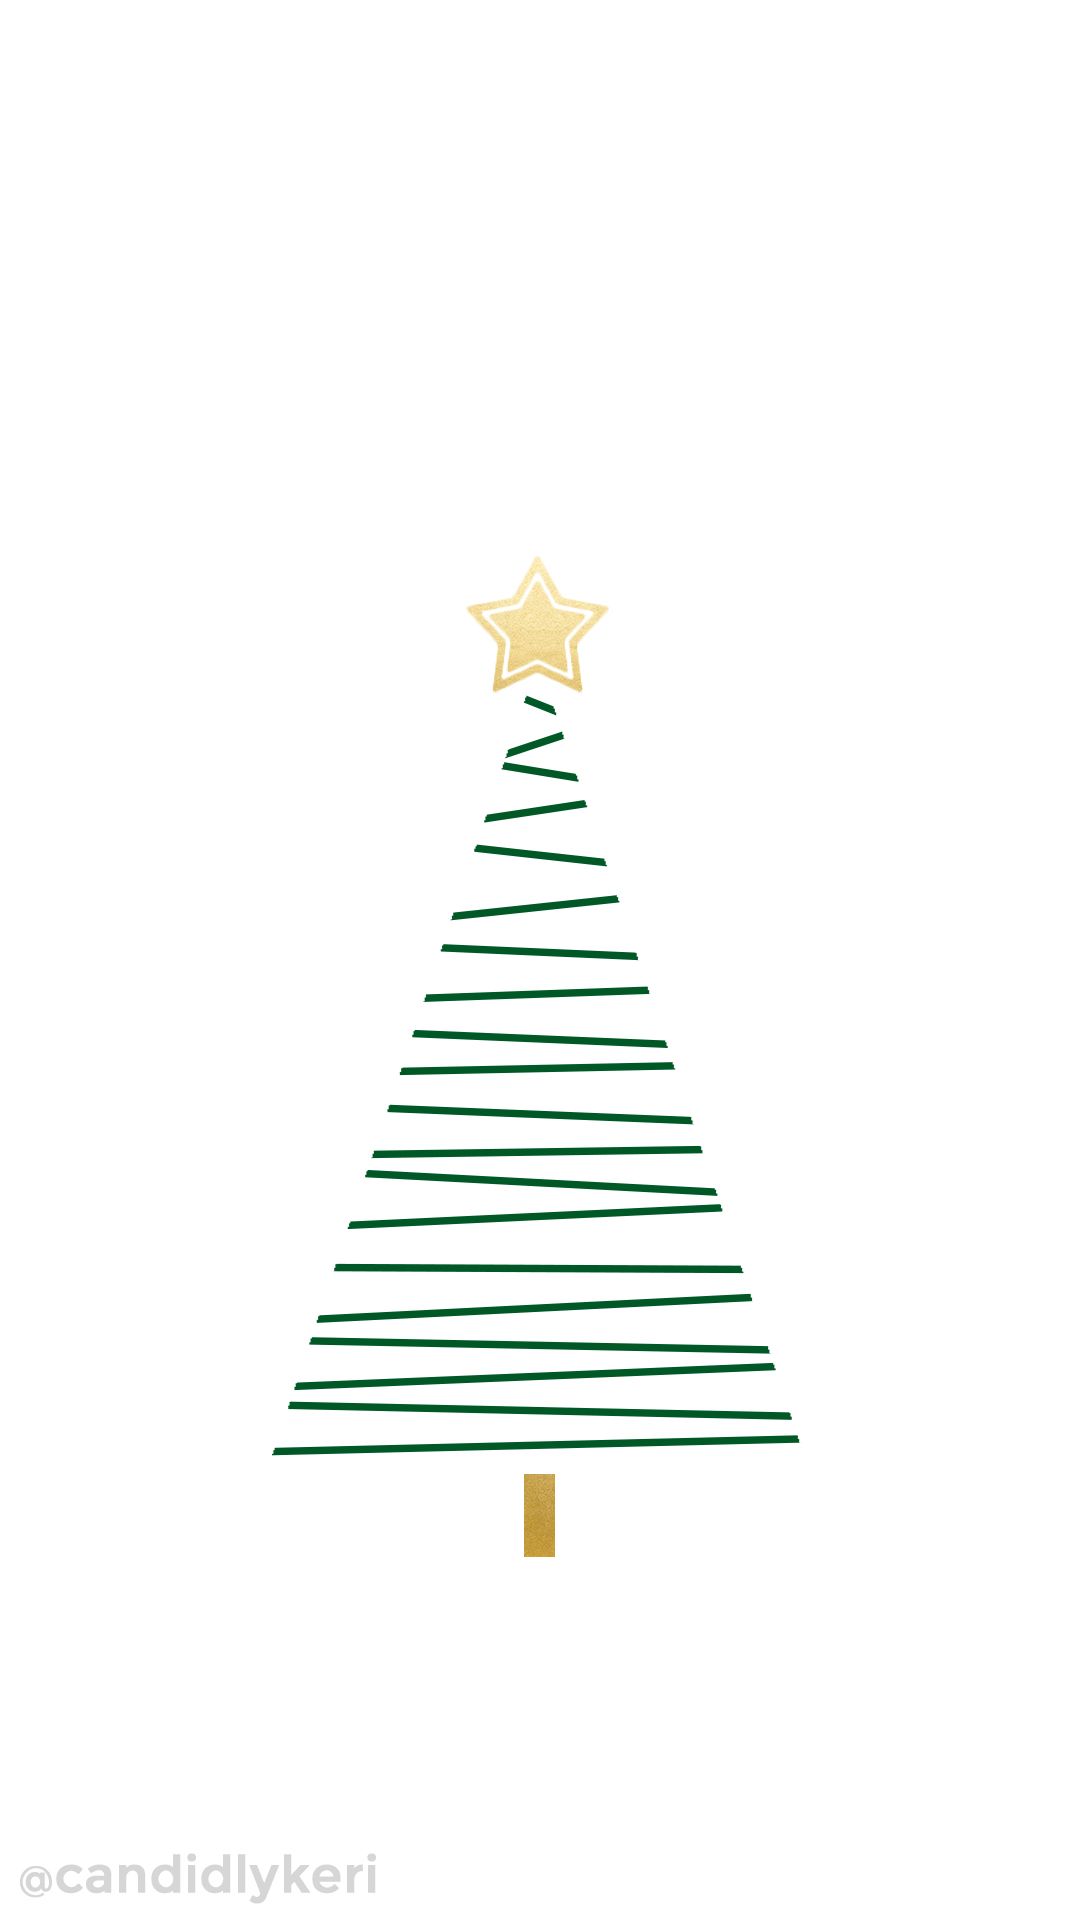 Christmas tree cartoon drawing background wallpaper you can download for free on the blo. Christmas phone wallpaper, Christmas tree drawing, Tree wallpaper iphone